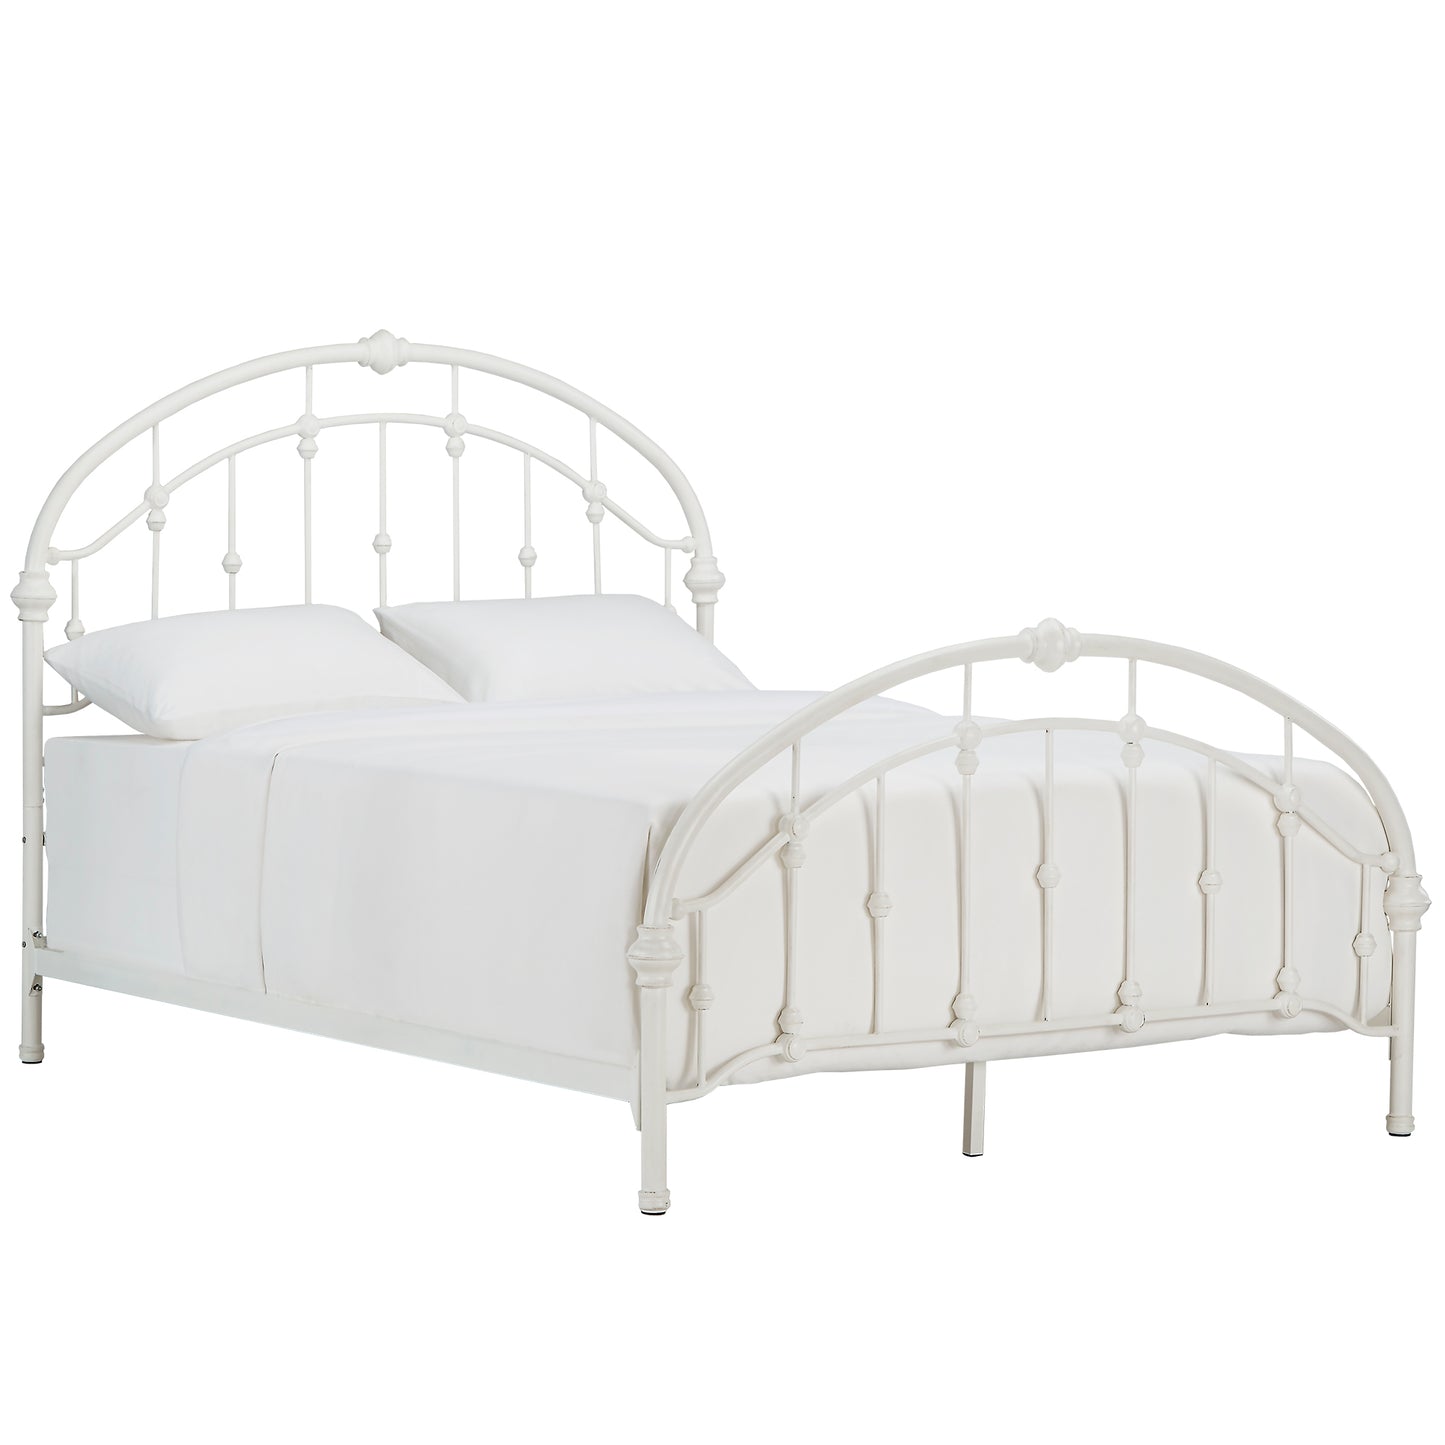 Curved Double Top Arches Victorian Iron Bed - Antique White, Queen Size